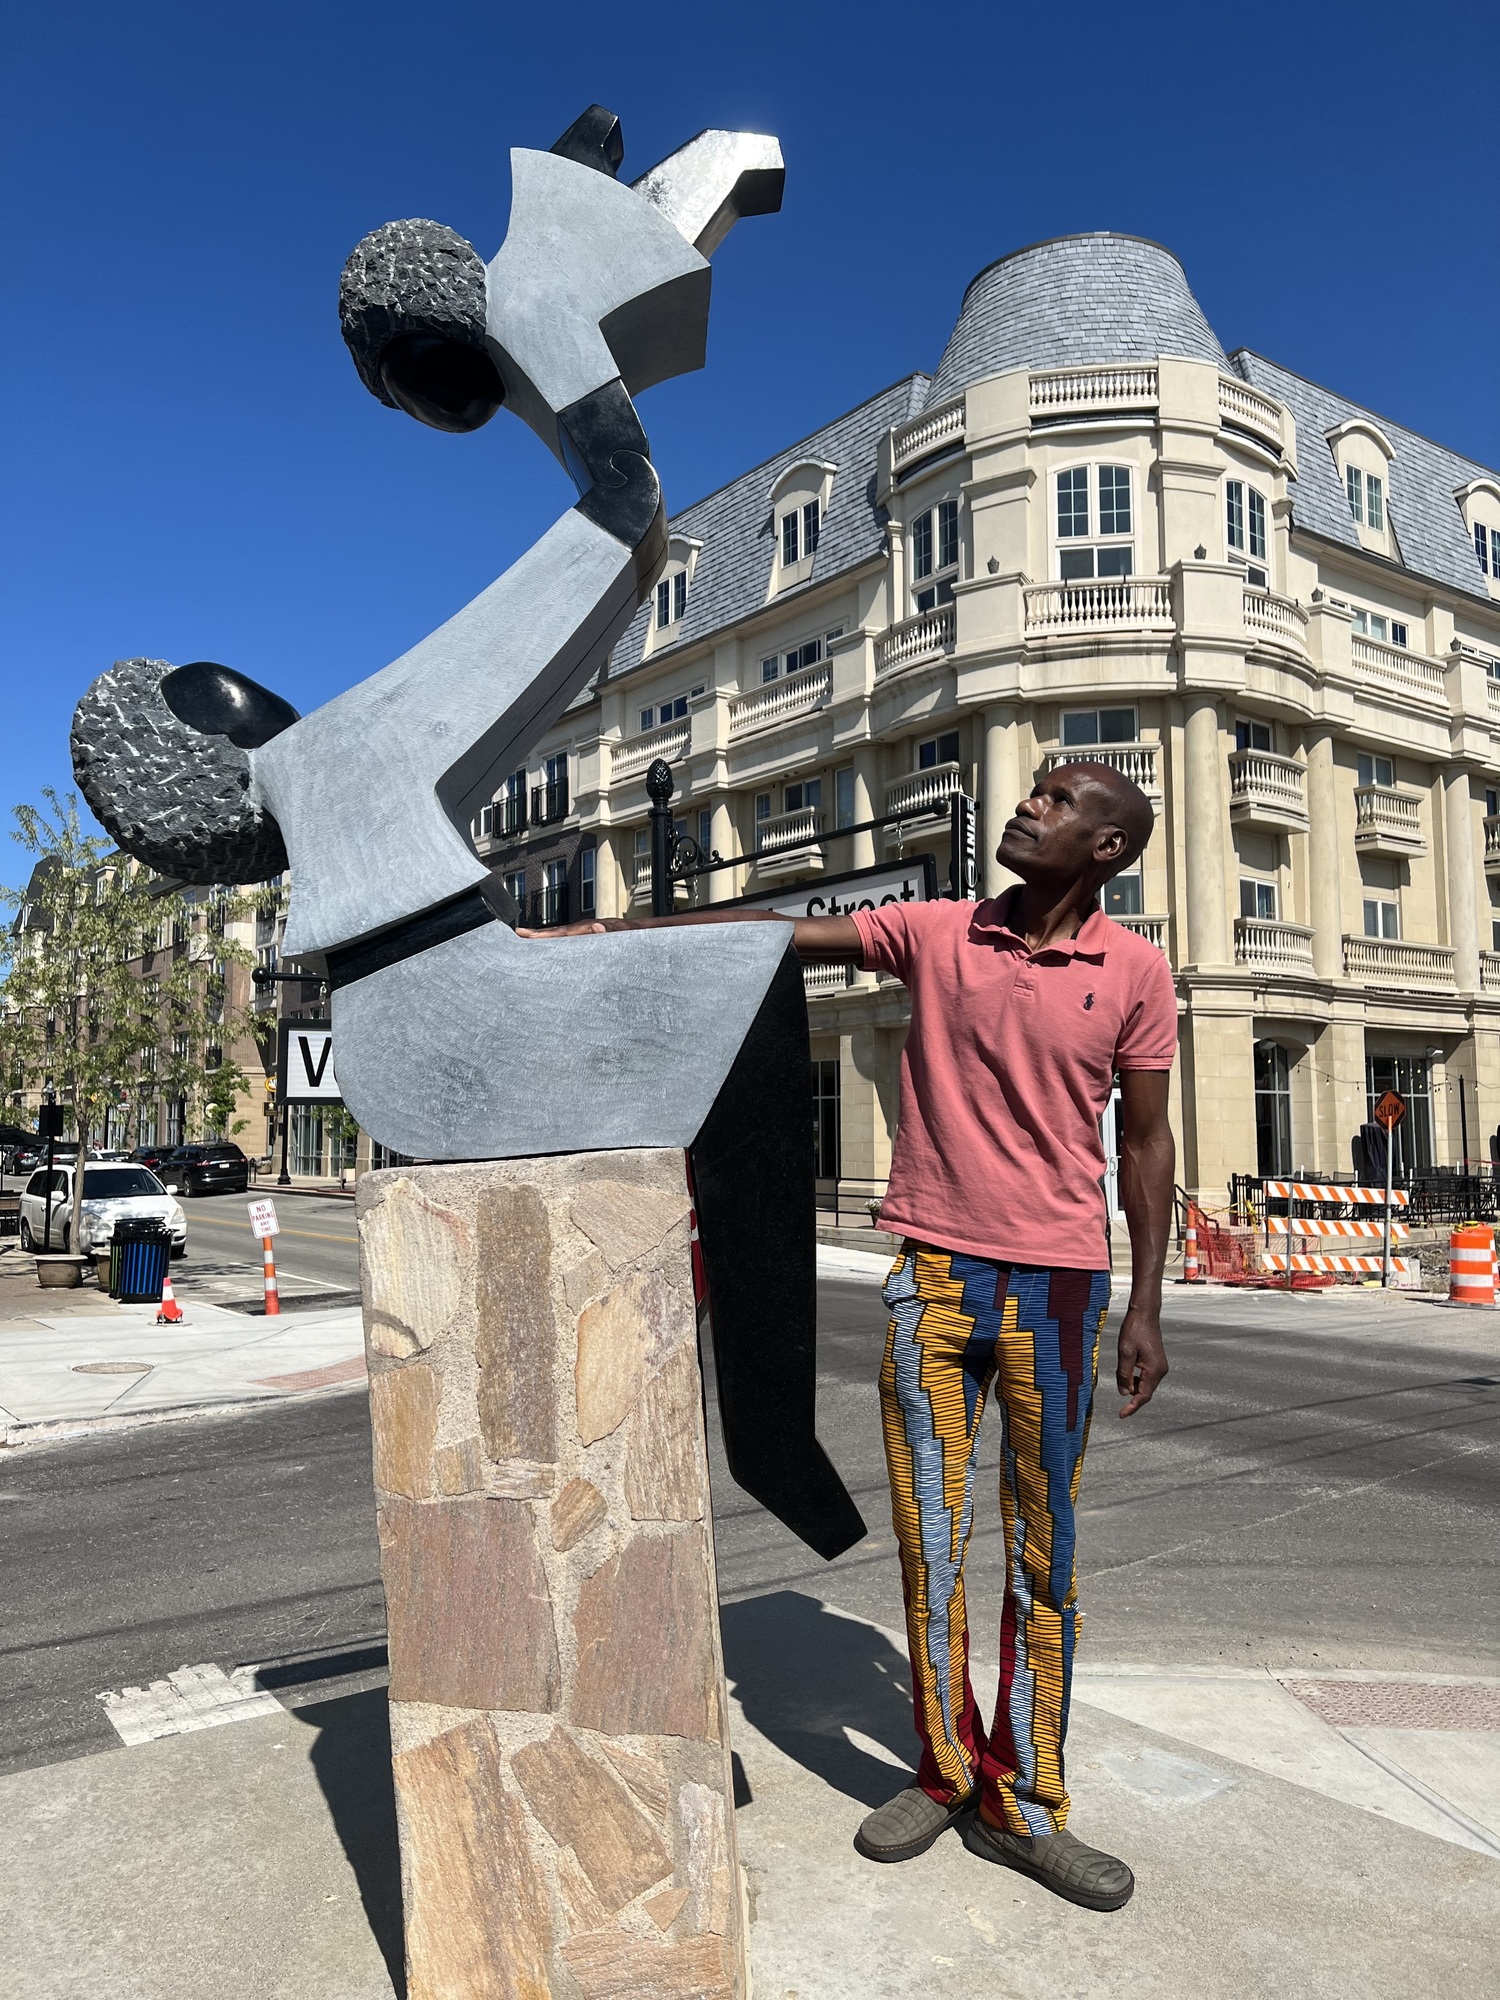 Carmel to install 5 Seward Johnson sculptures purchased in 2018